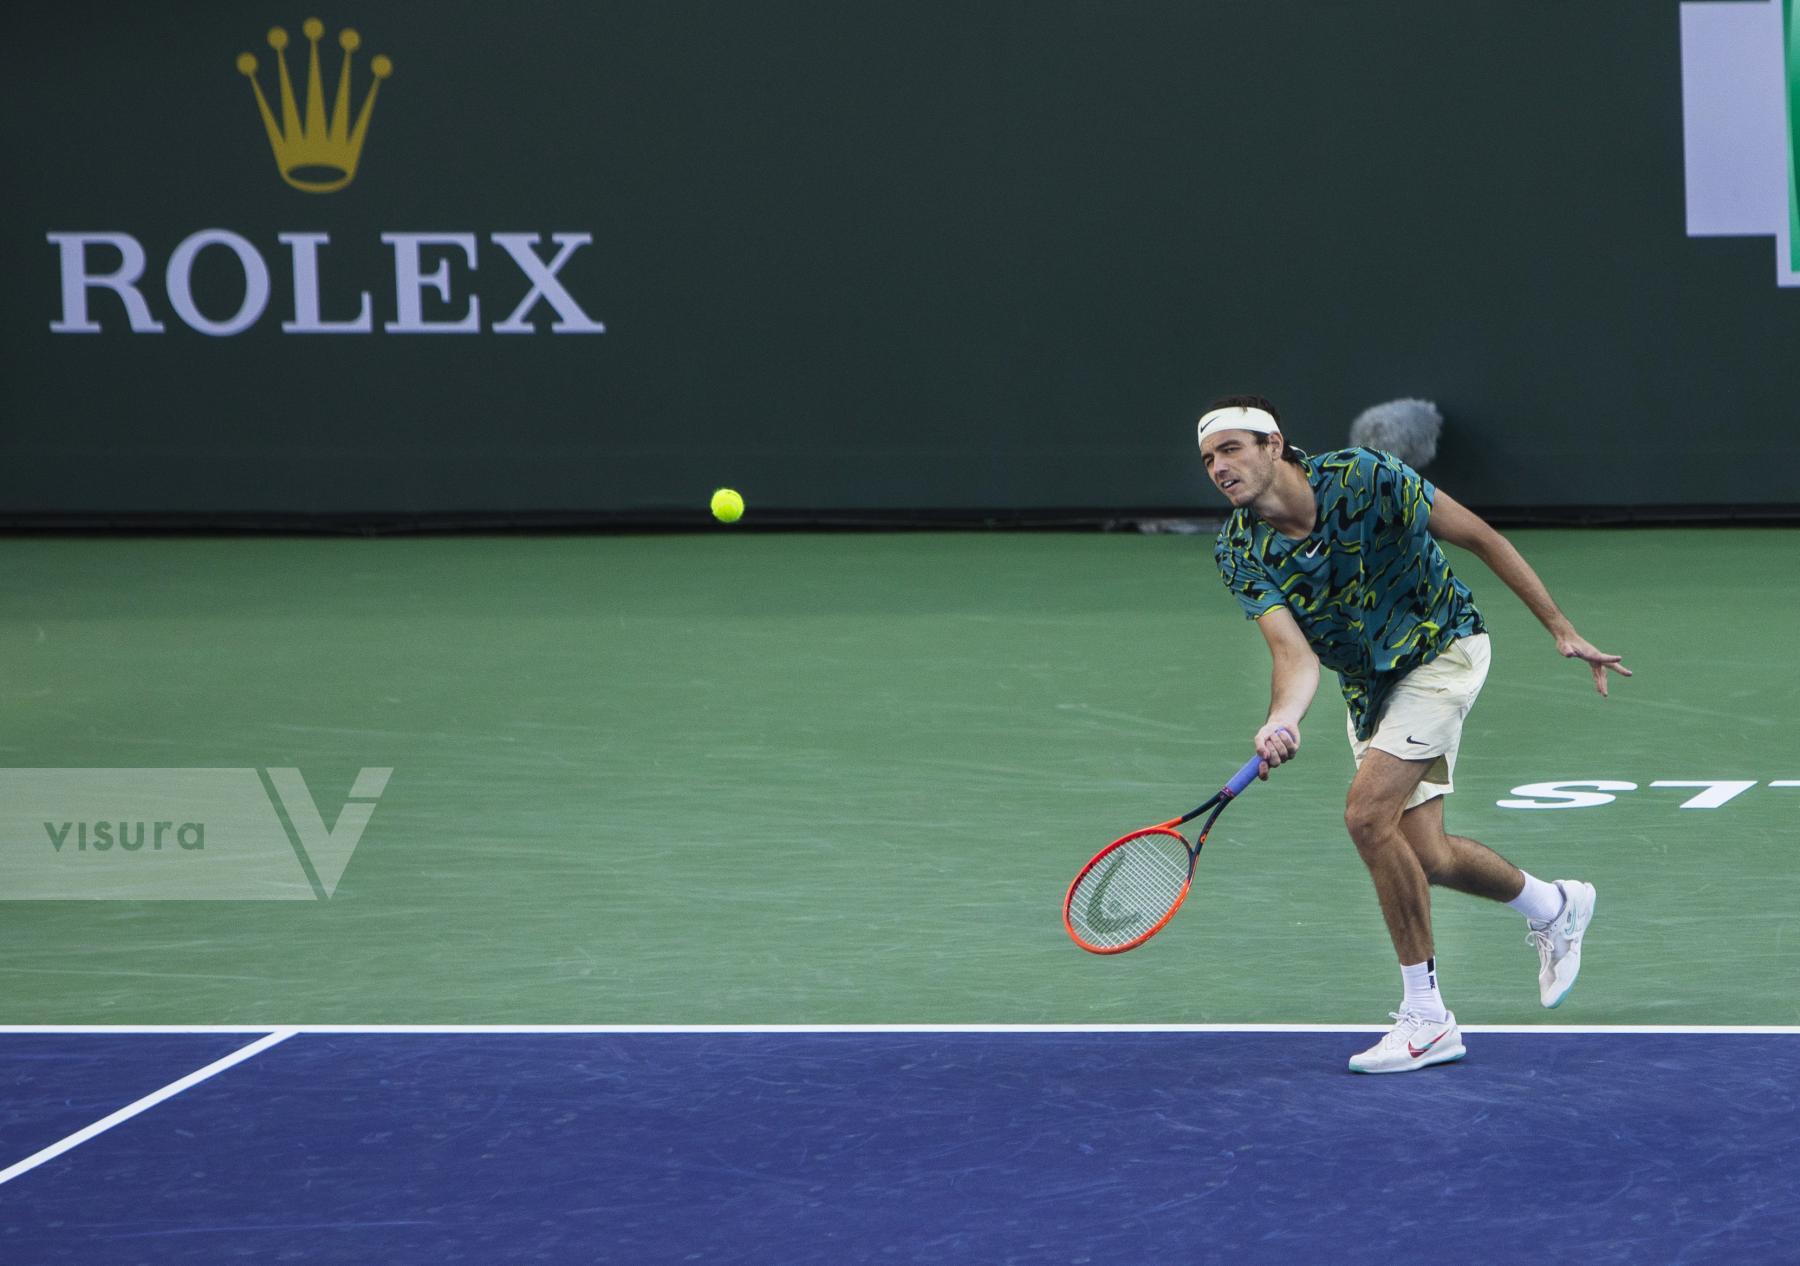 Purchase Taylor Fritz at BNP Paribas Open by Katie Linsky Shaw